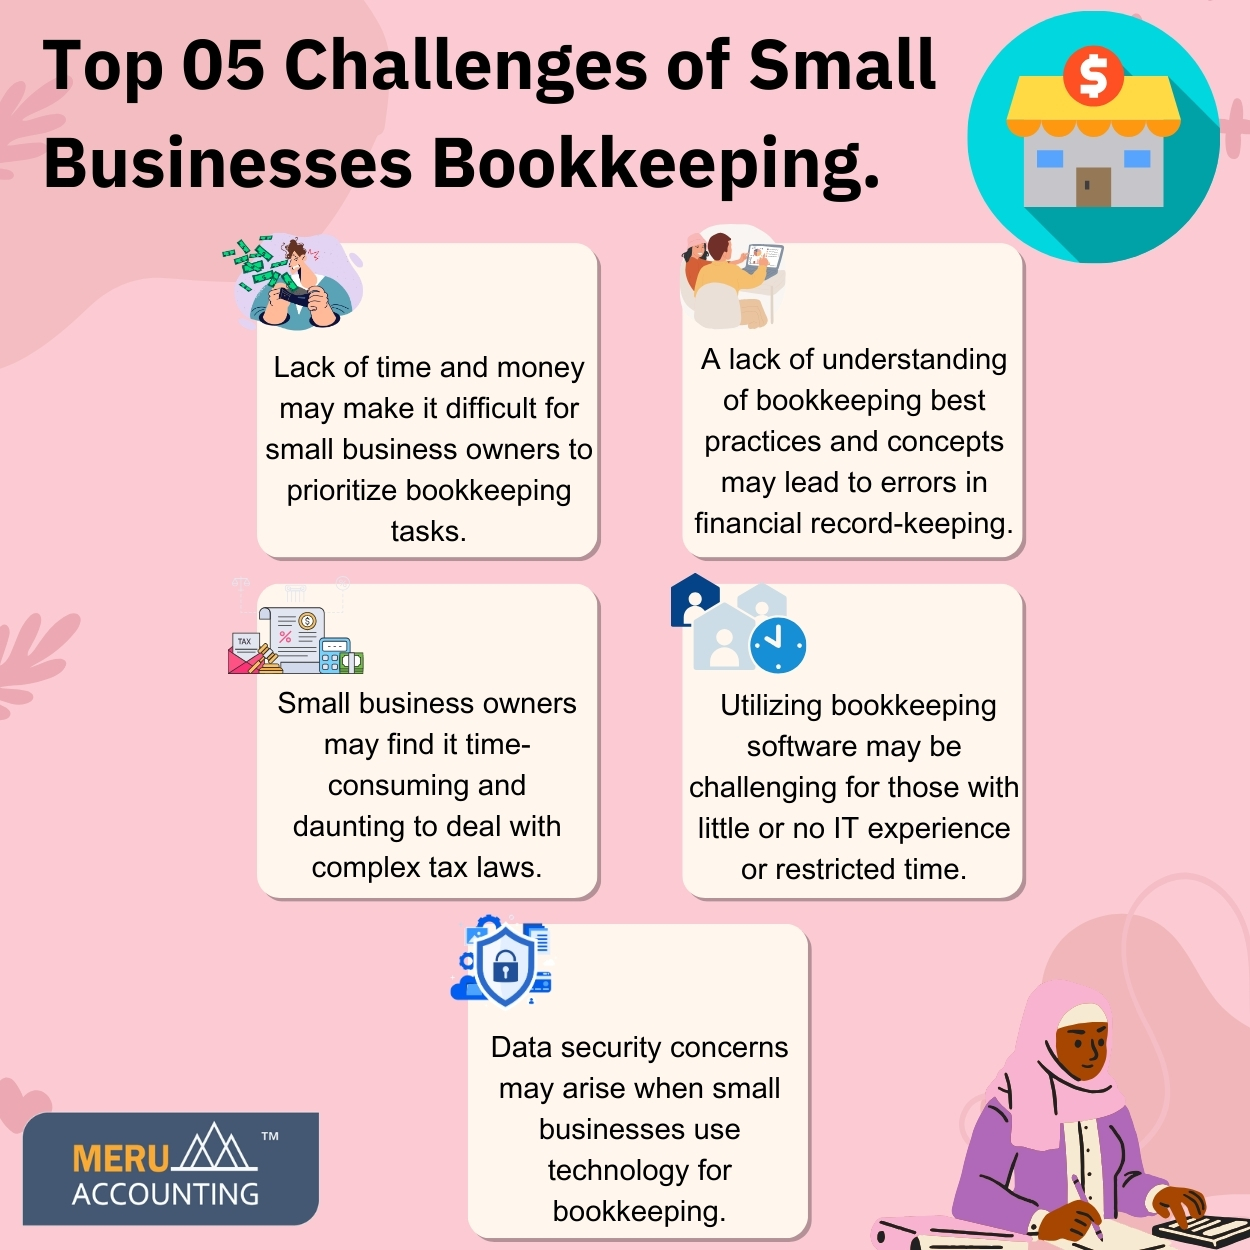 Top 05 Challenges of Small Businesses Bookkeeping. size 1250 by 1250 v1